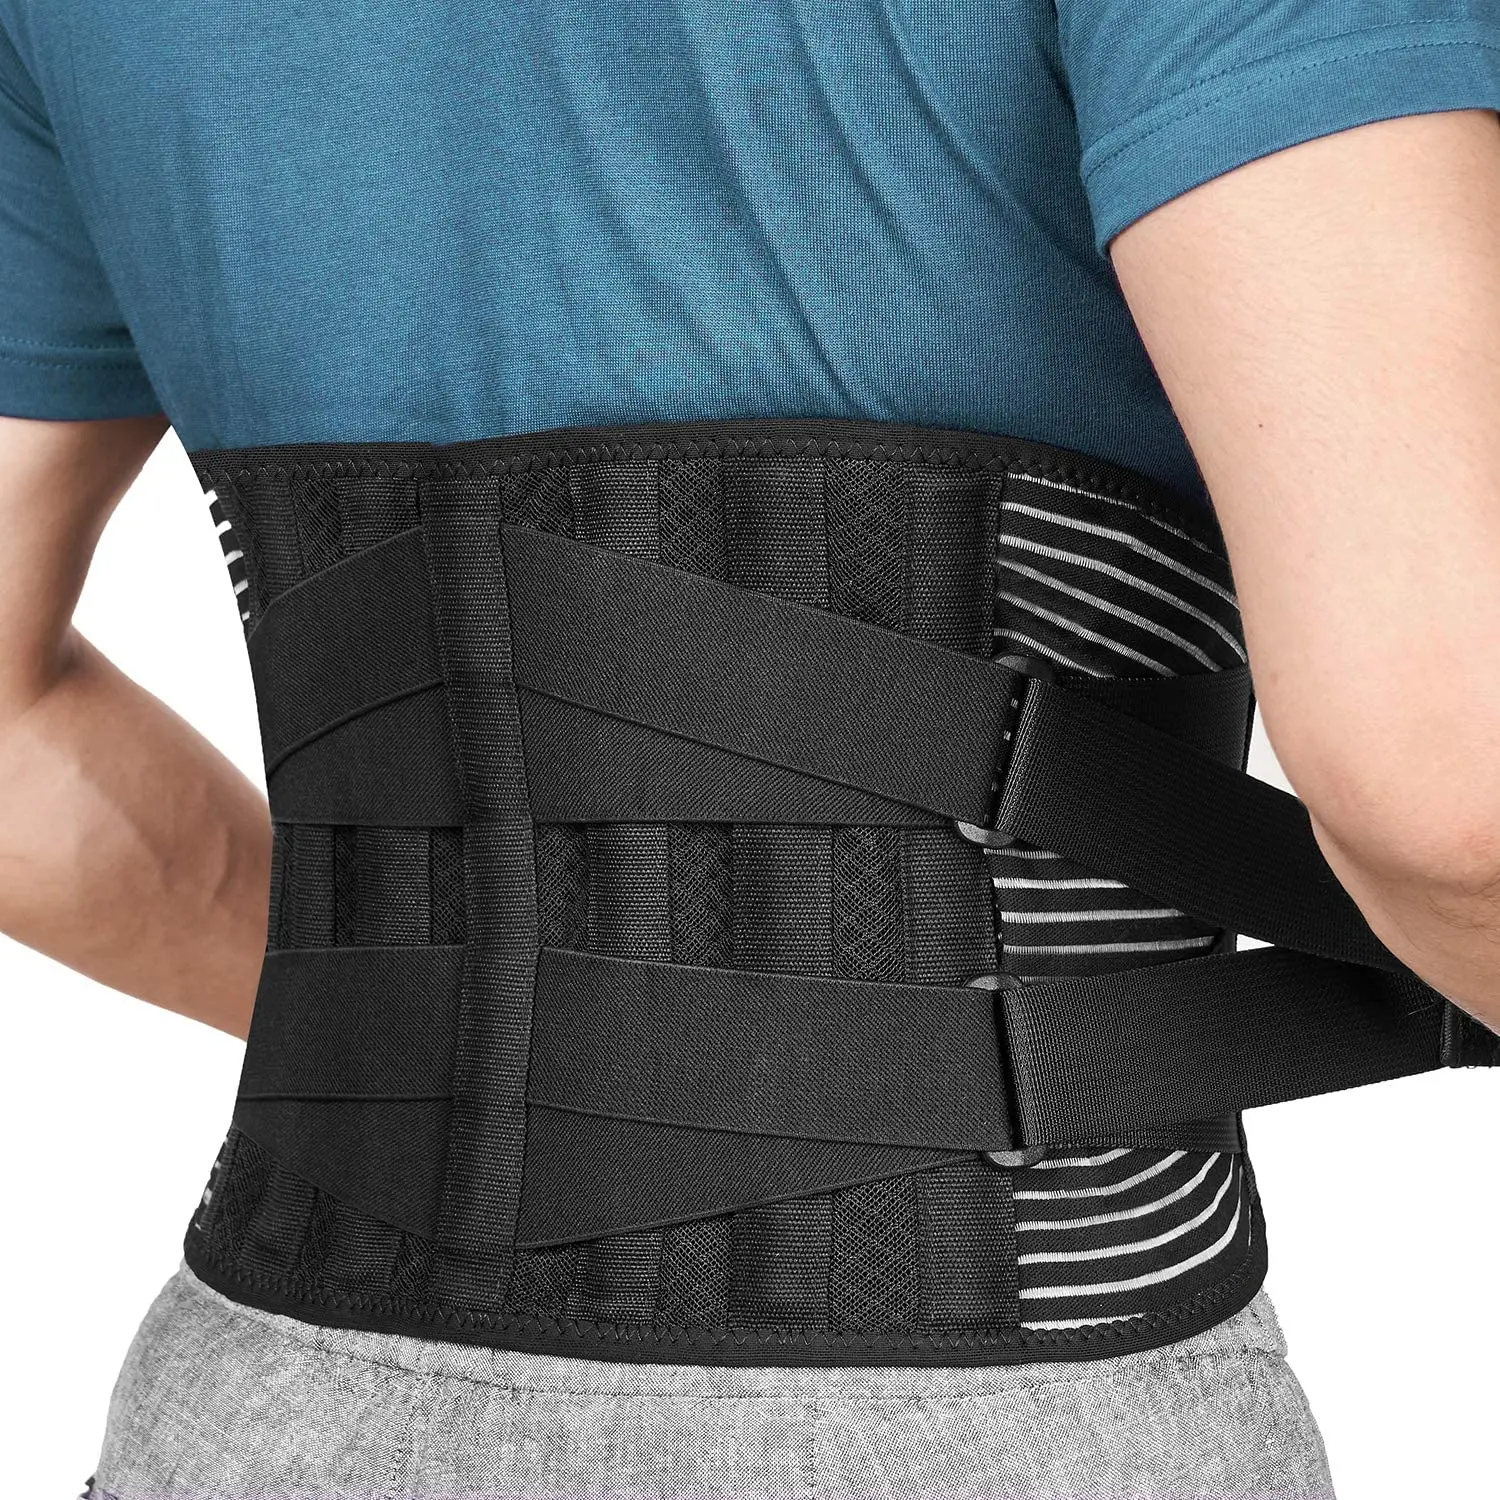 Waist Support Belt Sports Adjustable Lumbar Back Brace Breathable waist protection Exercise Fitness Cycling Running Tennis Golf